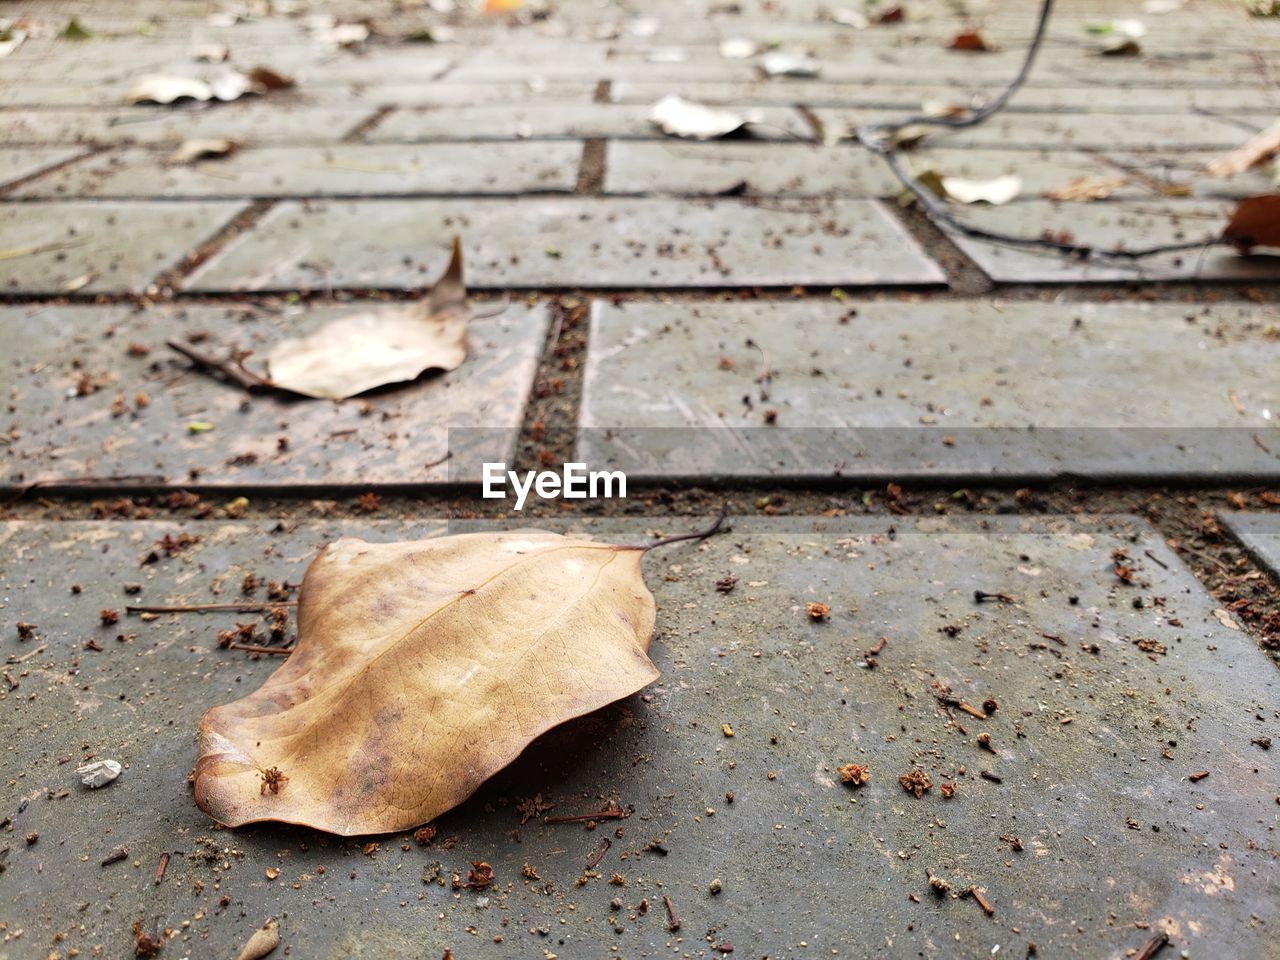 HIGH ANGLE VIEW OF DRY LEAF ON STREET